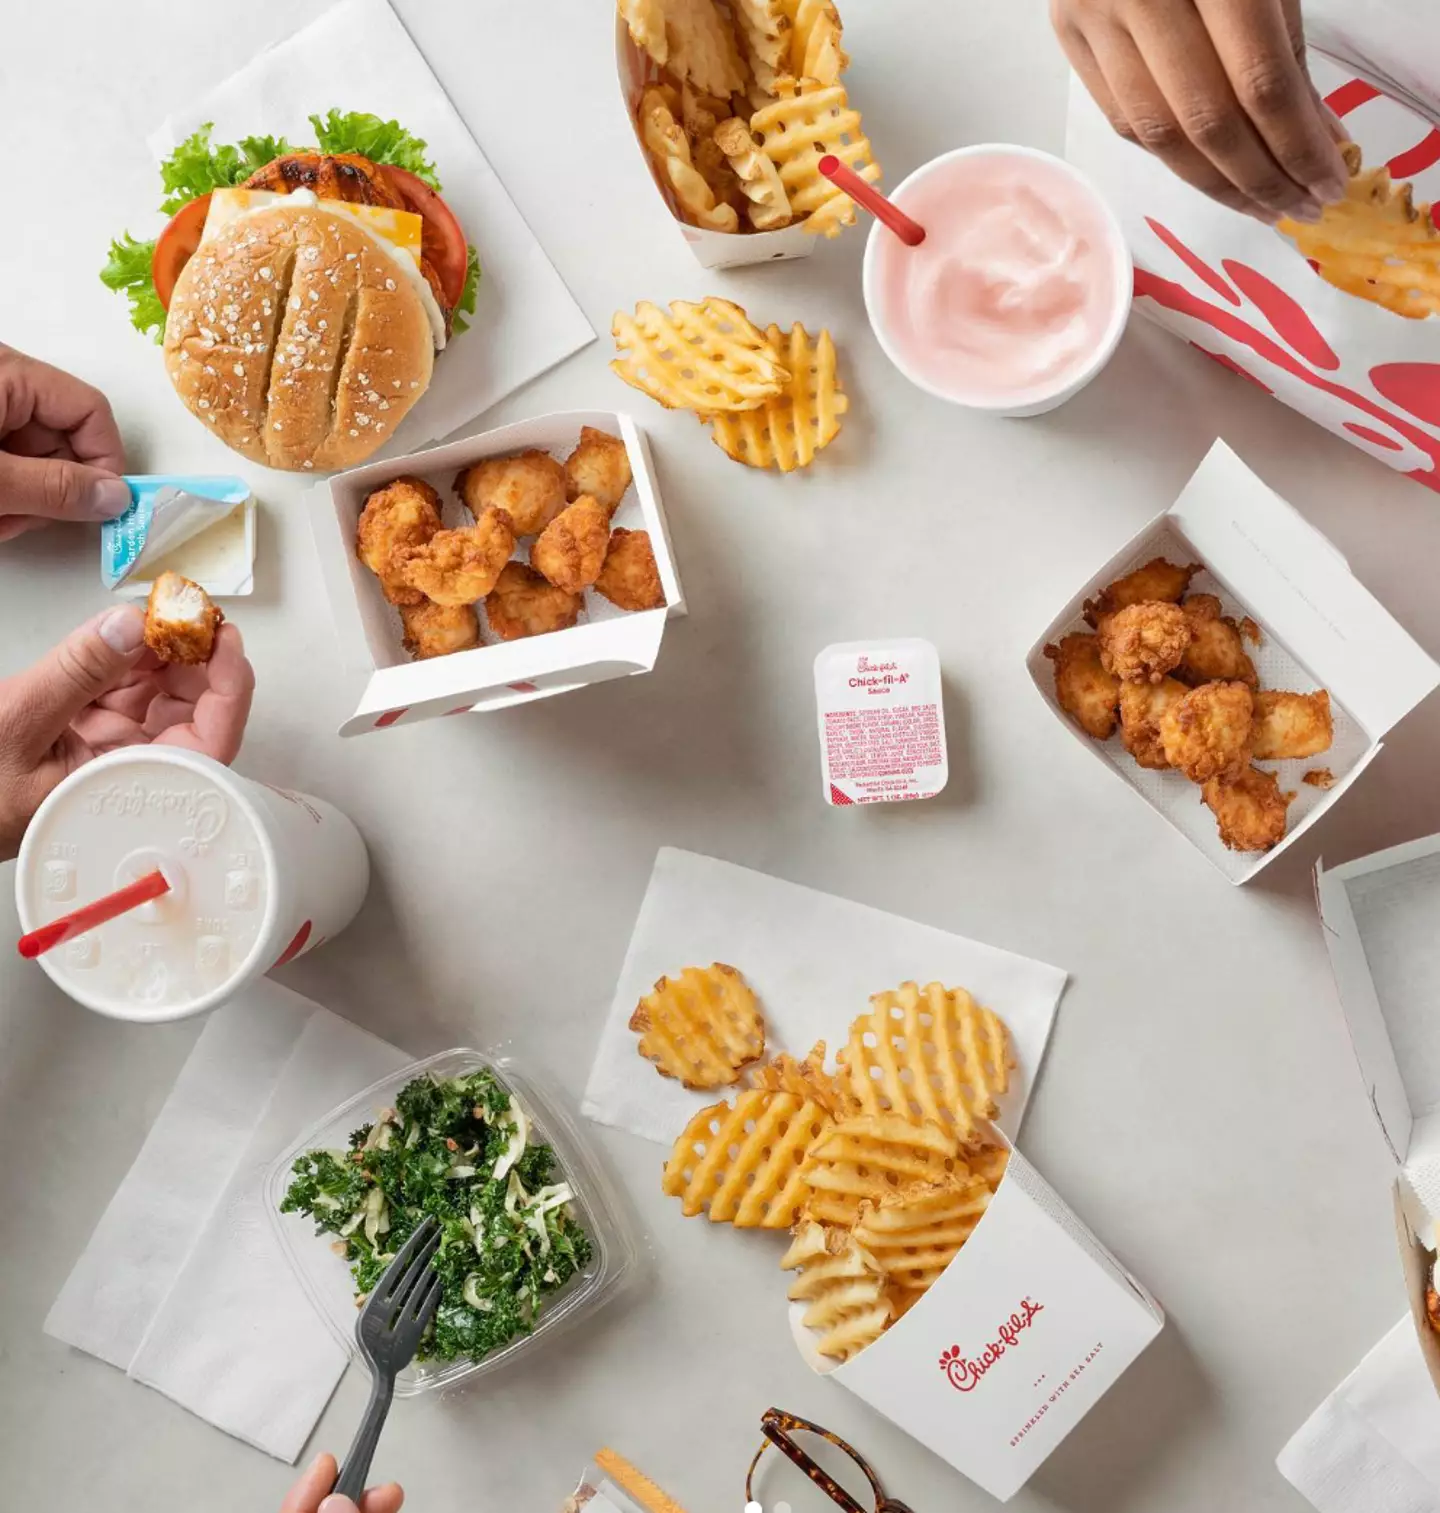 The US fast food chain Chick-fil-A is coming to the UK.